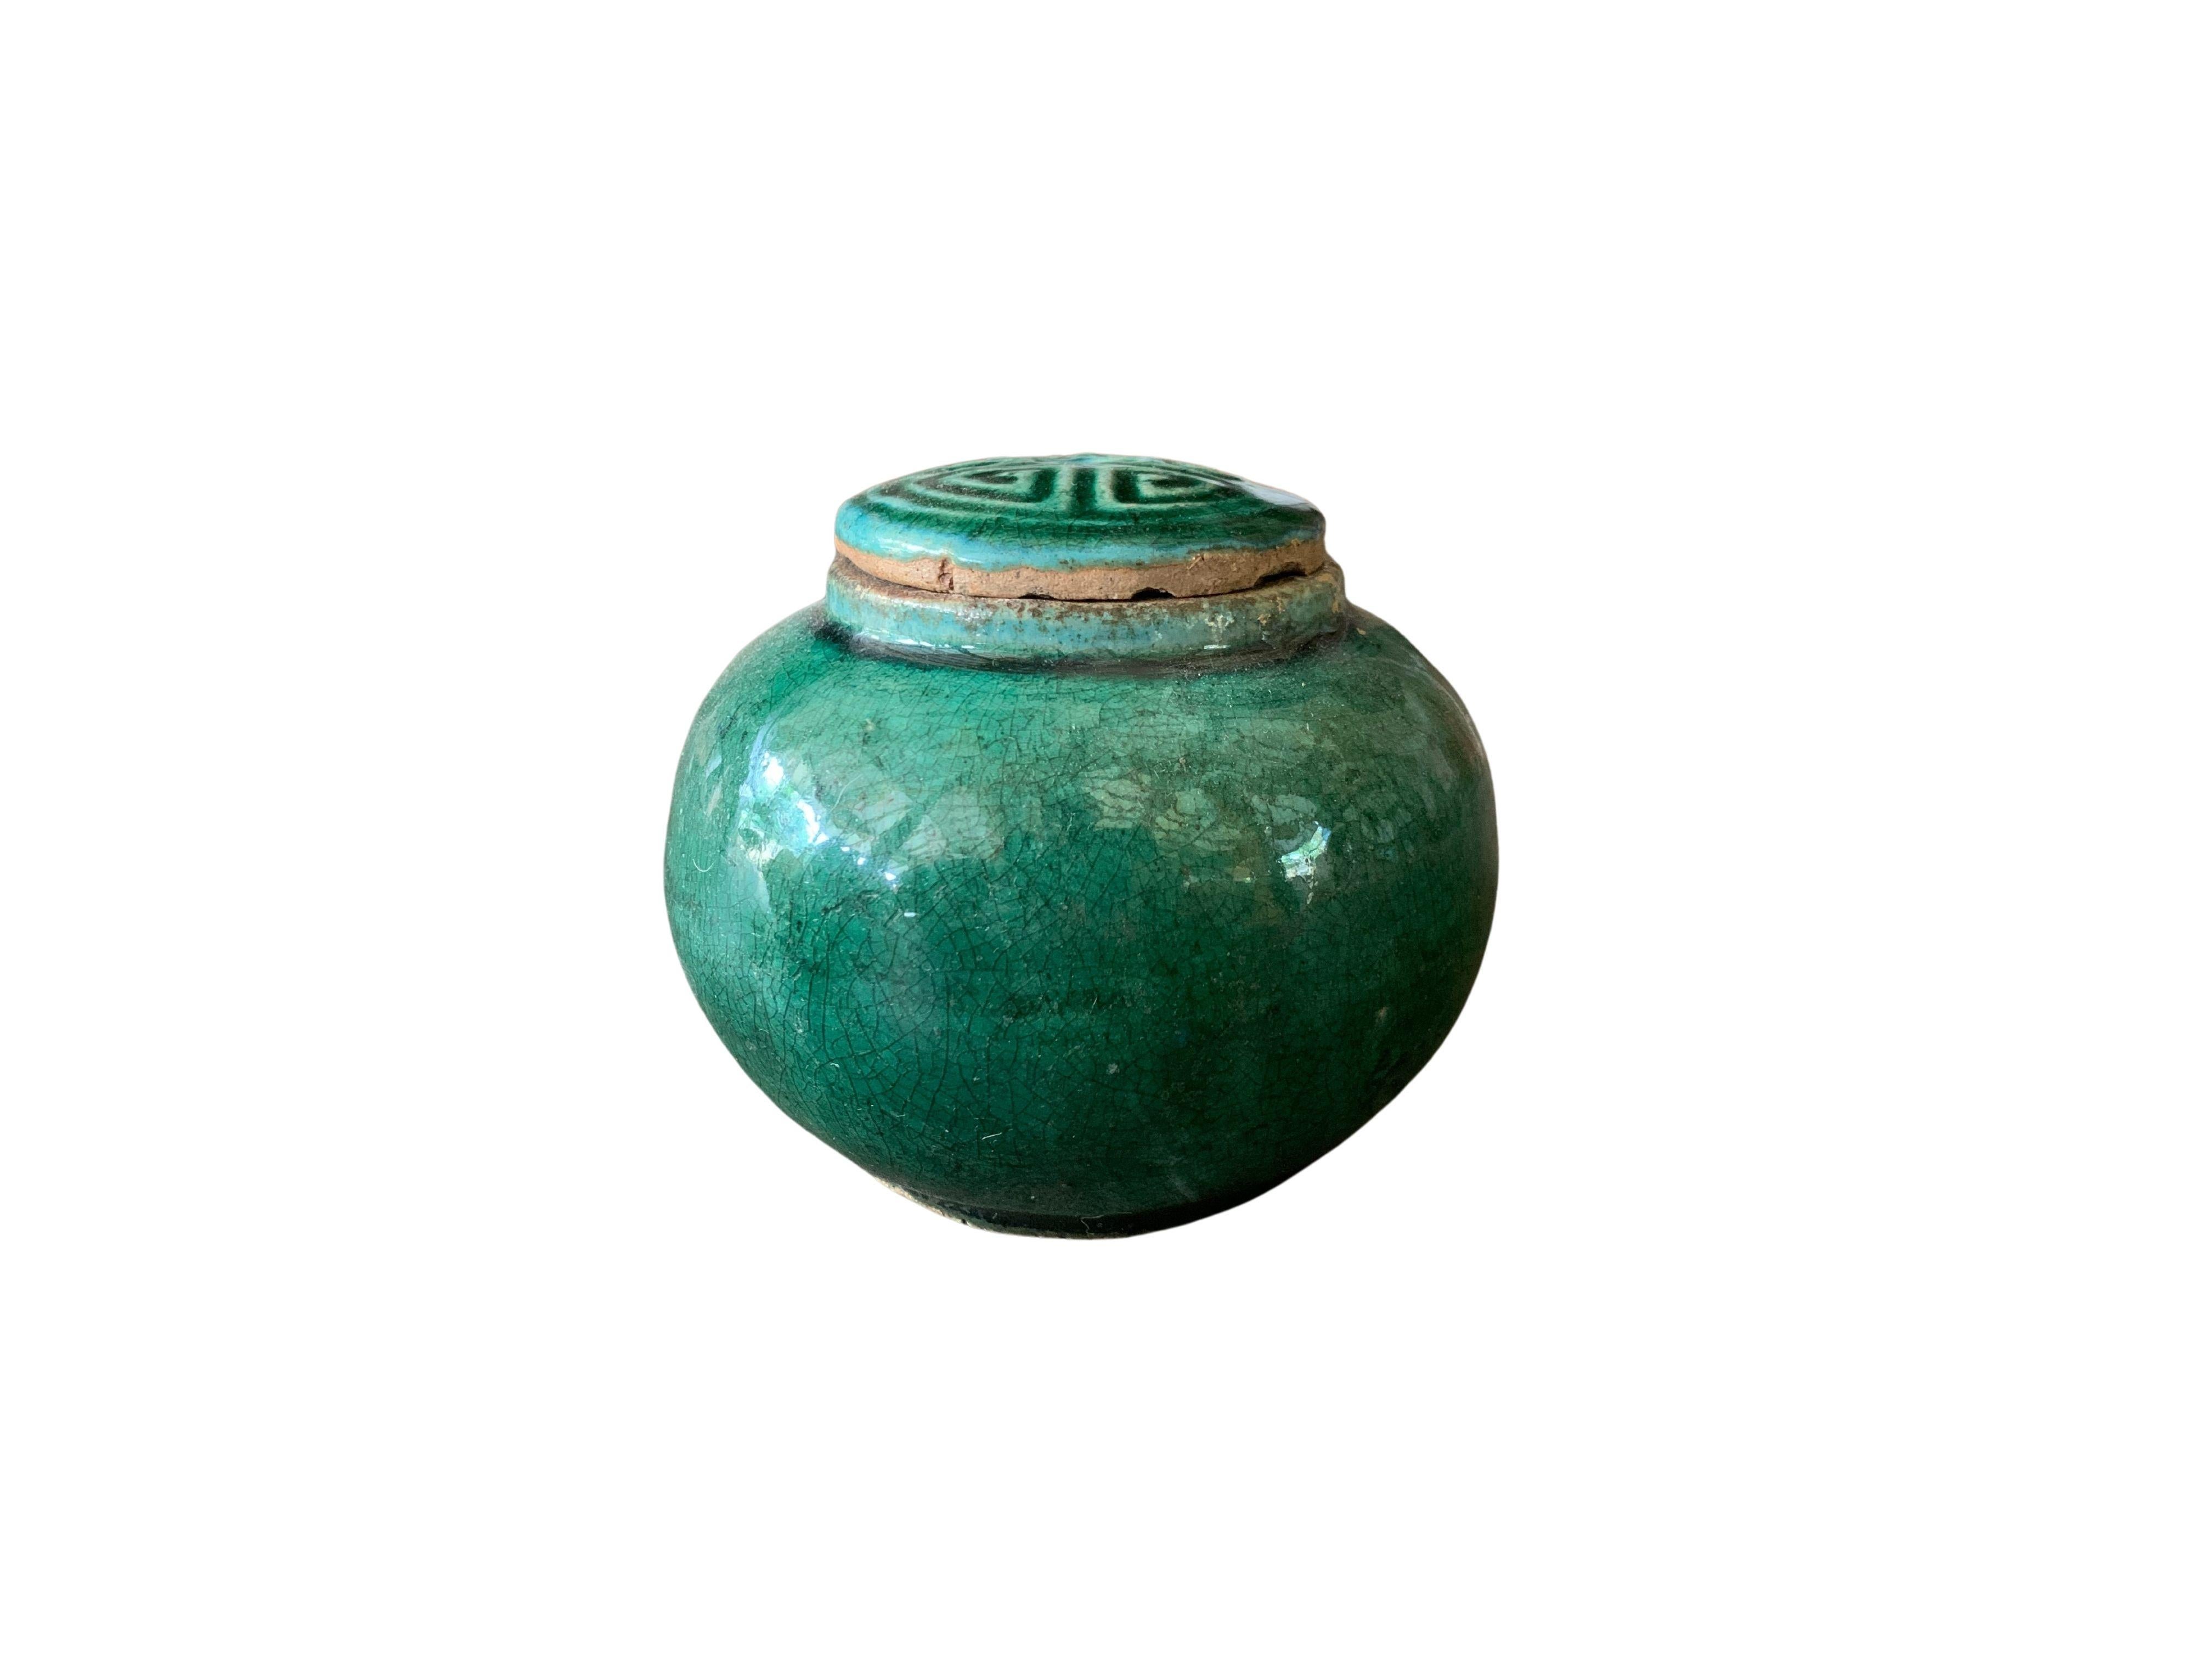 A small early 20th century Shiwan green-glazed ginger jar from China's Shiwanzhen district near Guangdong. It features a beautifully engraved lid.